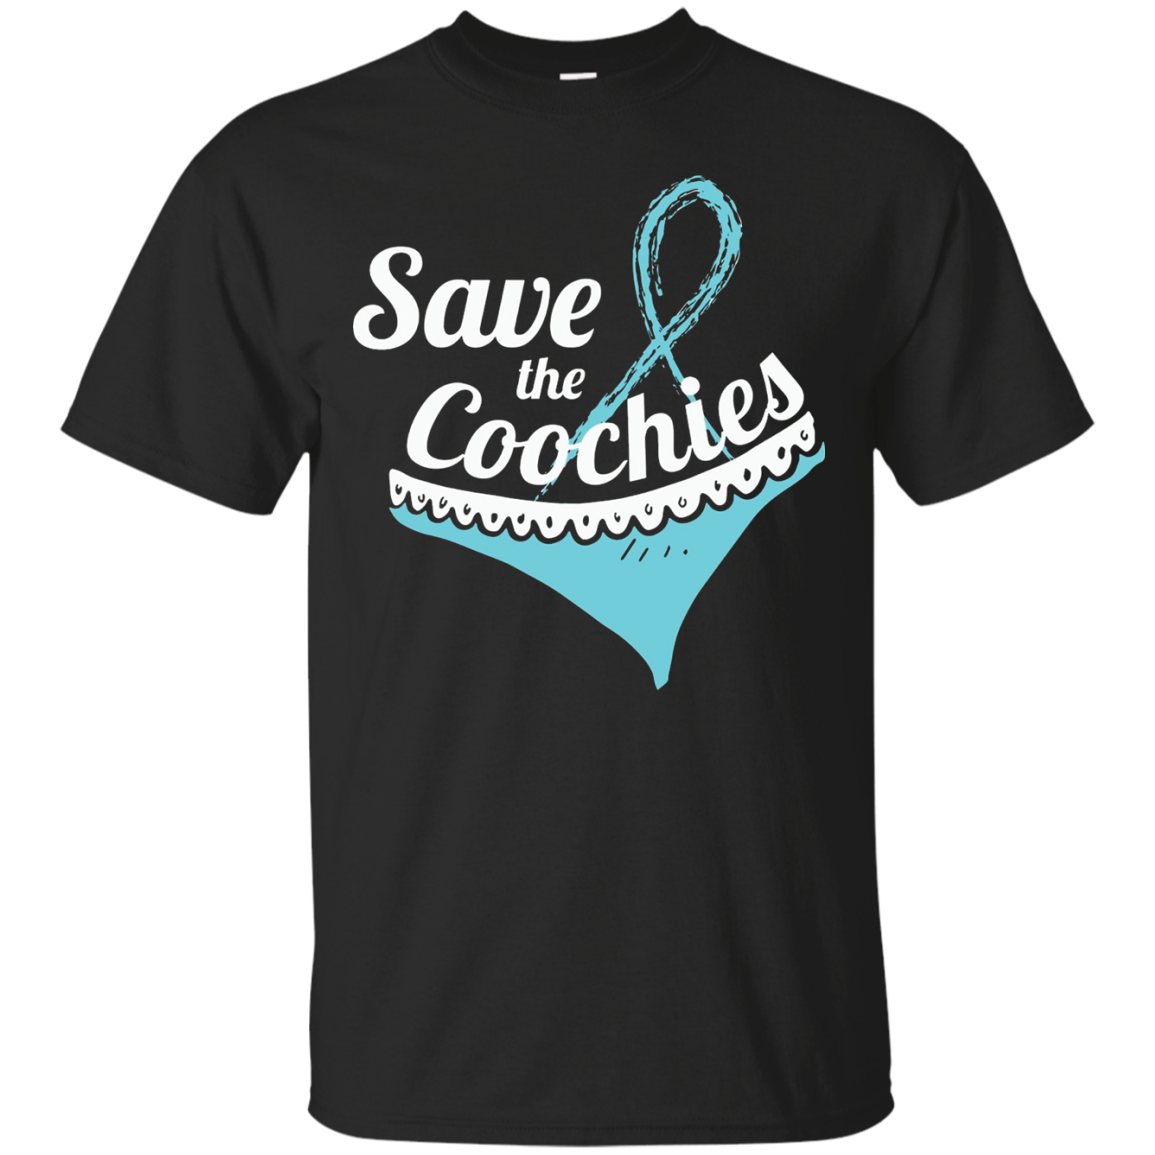 Cervical Cancer Awareness Shirt - Save The Coochies